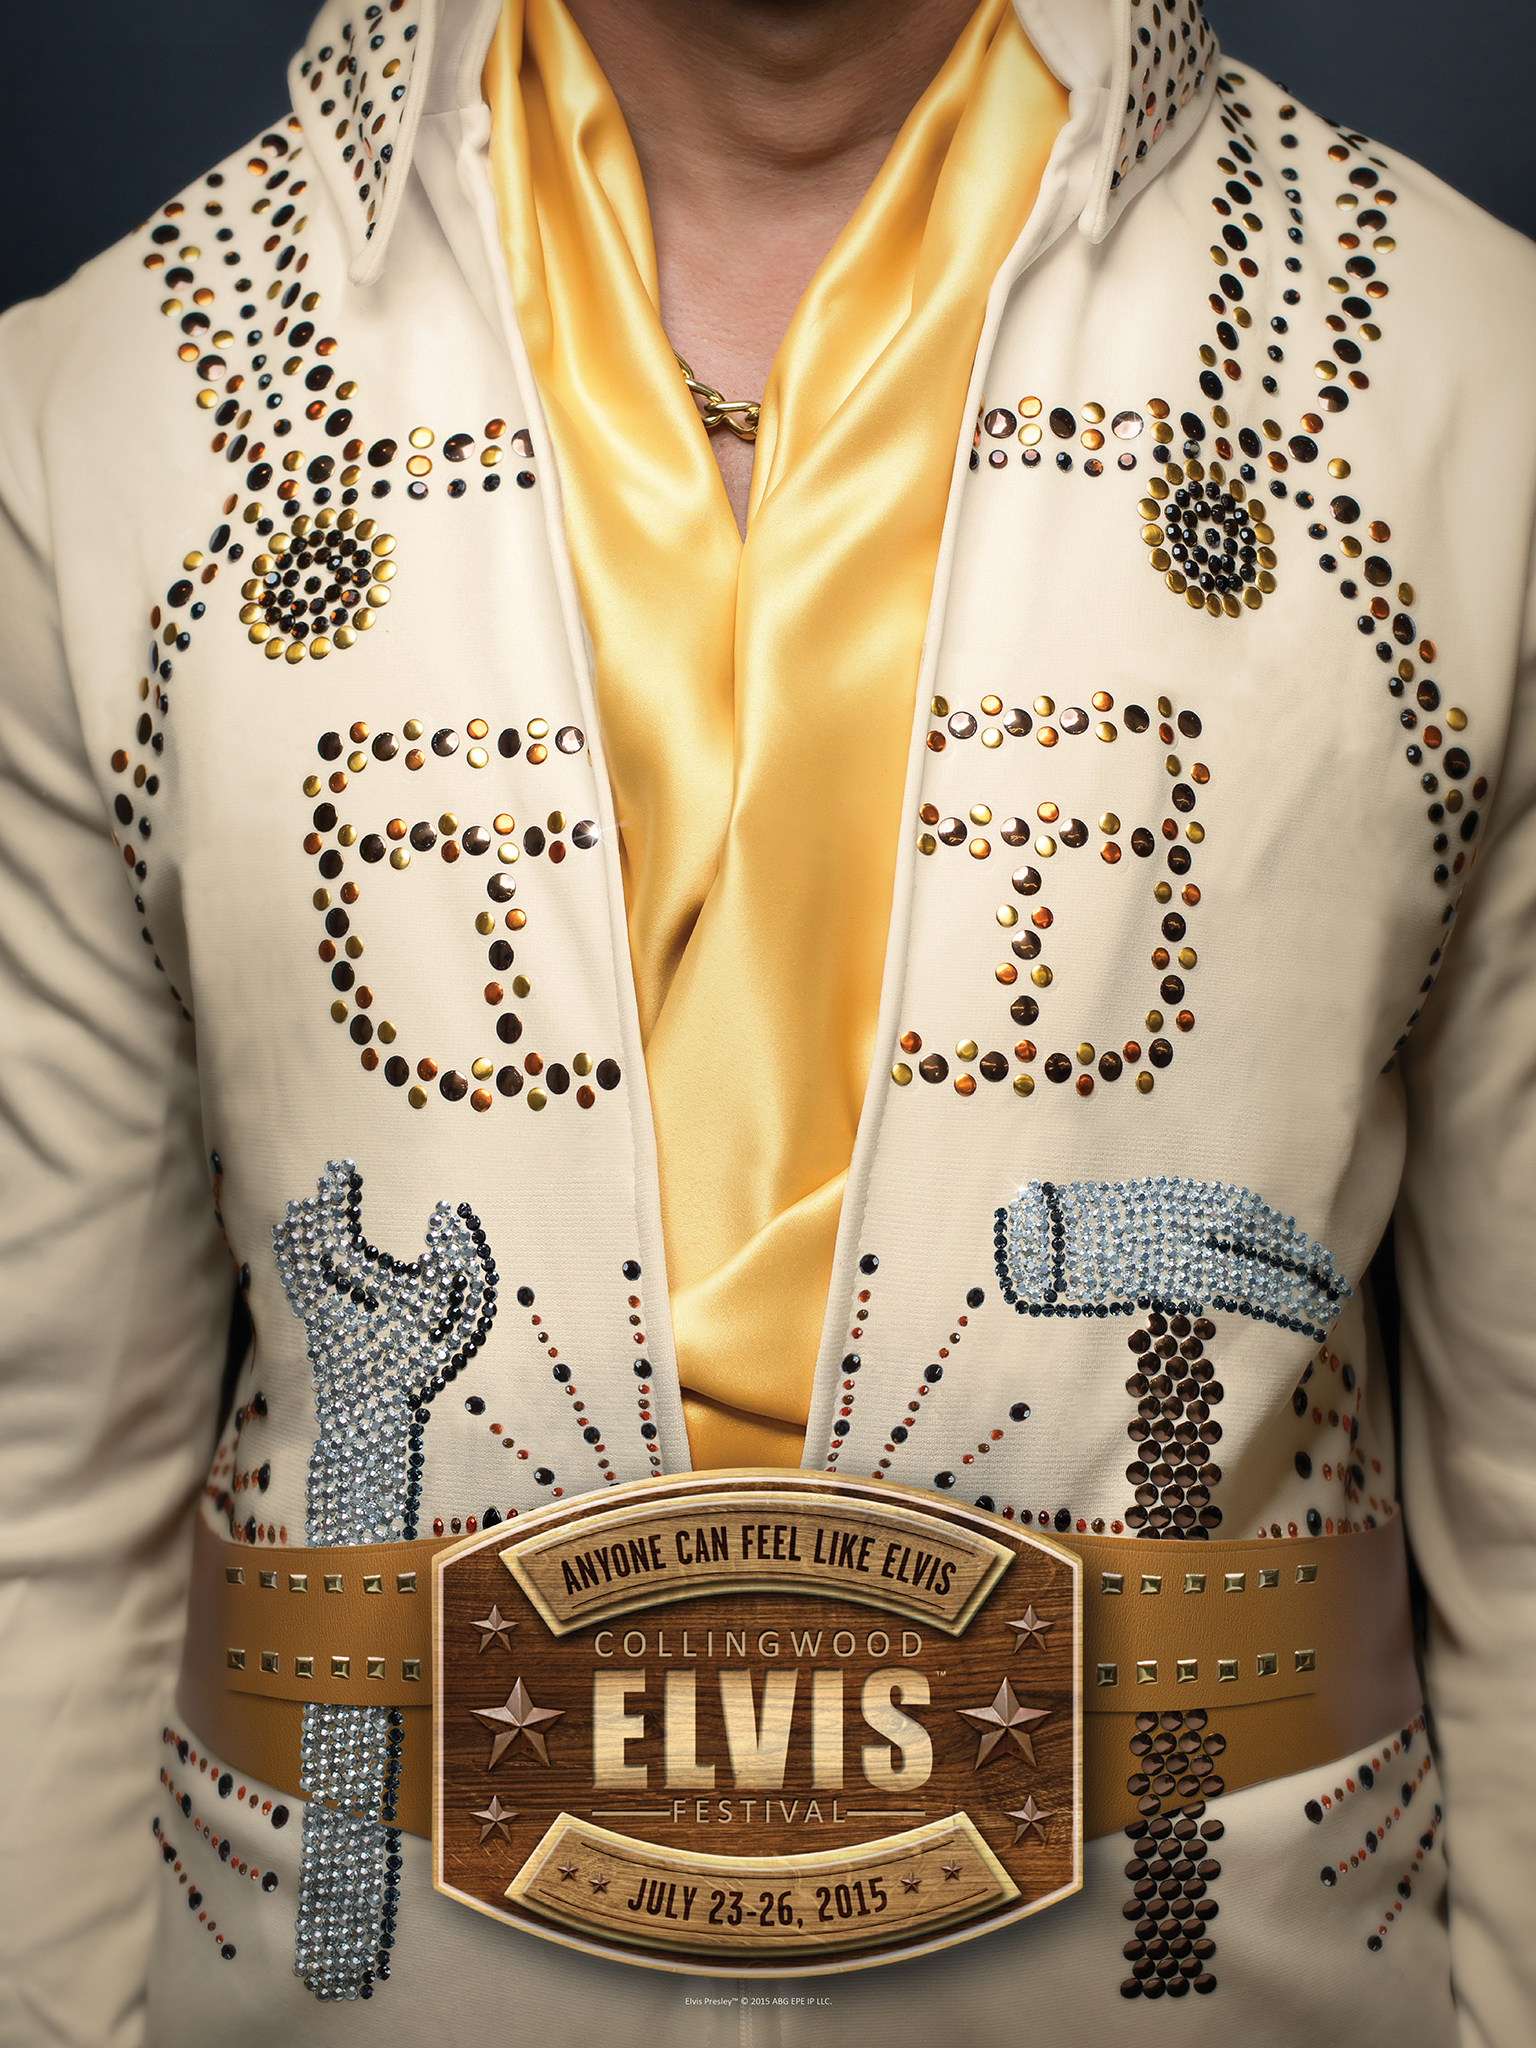 Anyone can be Elvis.